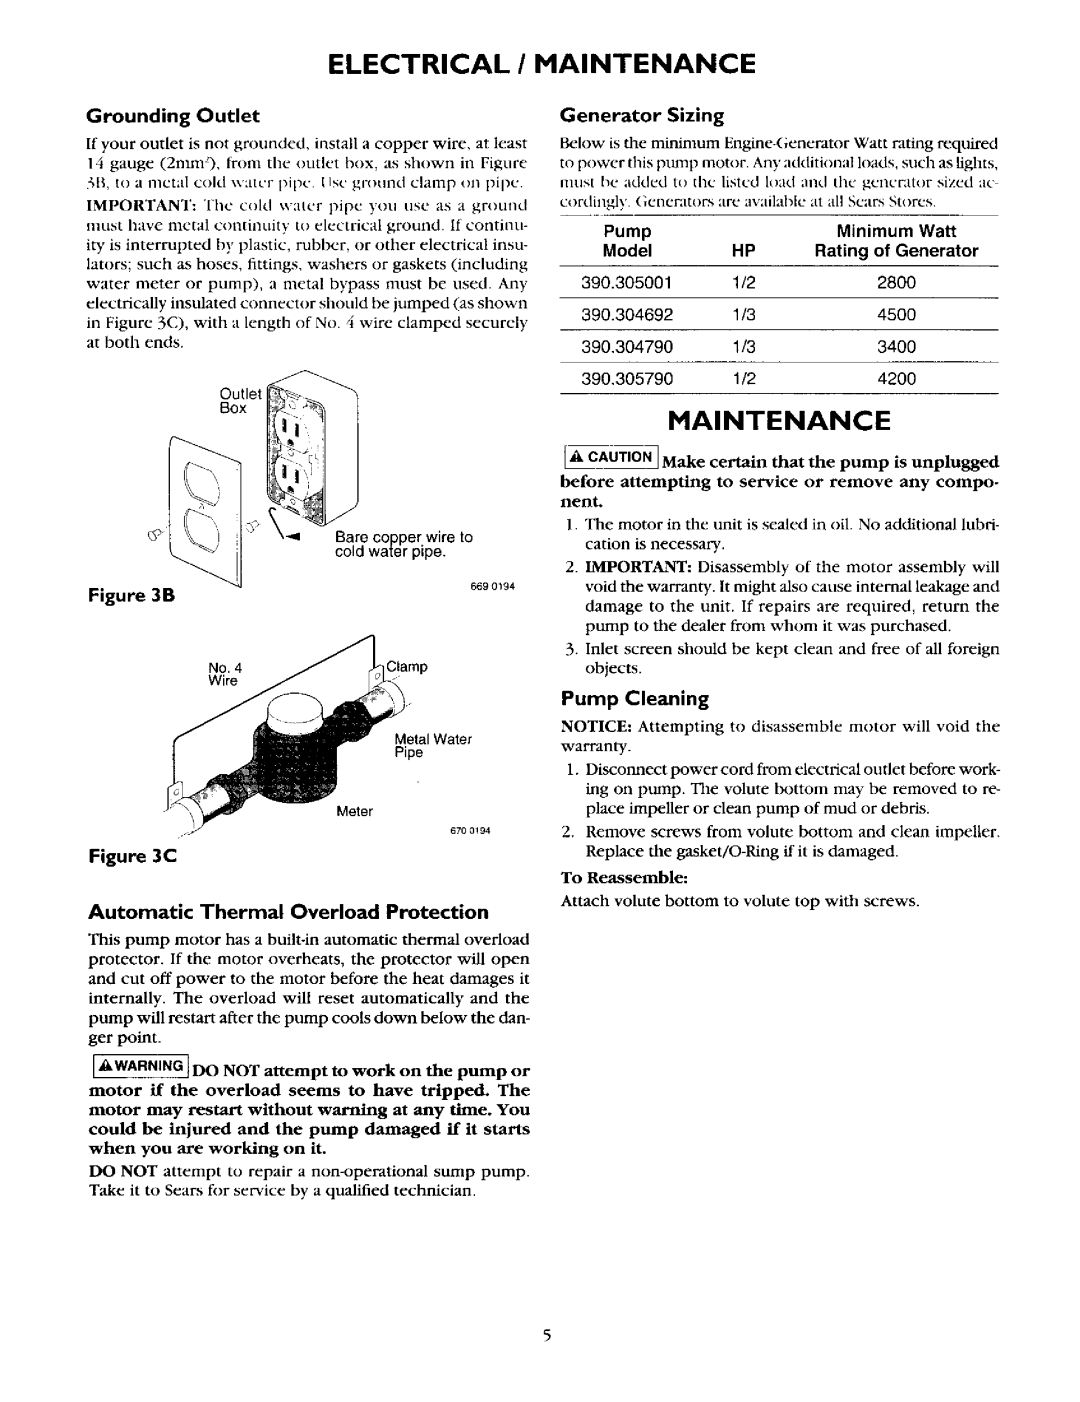 Sears 390.304692 owner manual Electrical / Maintenance, Pipe 